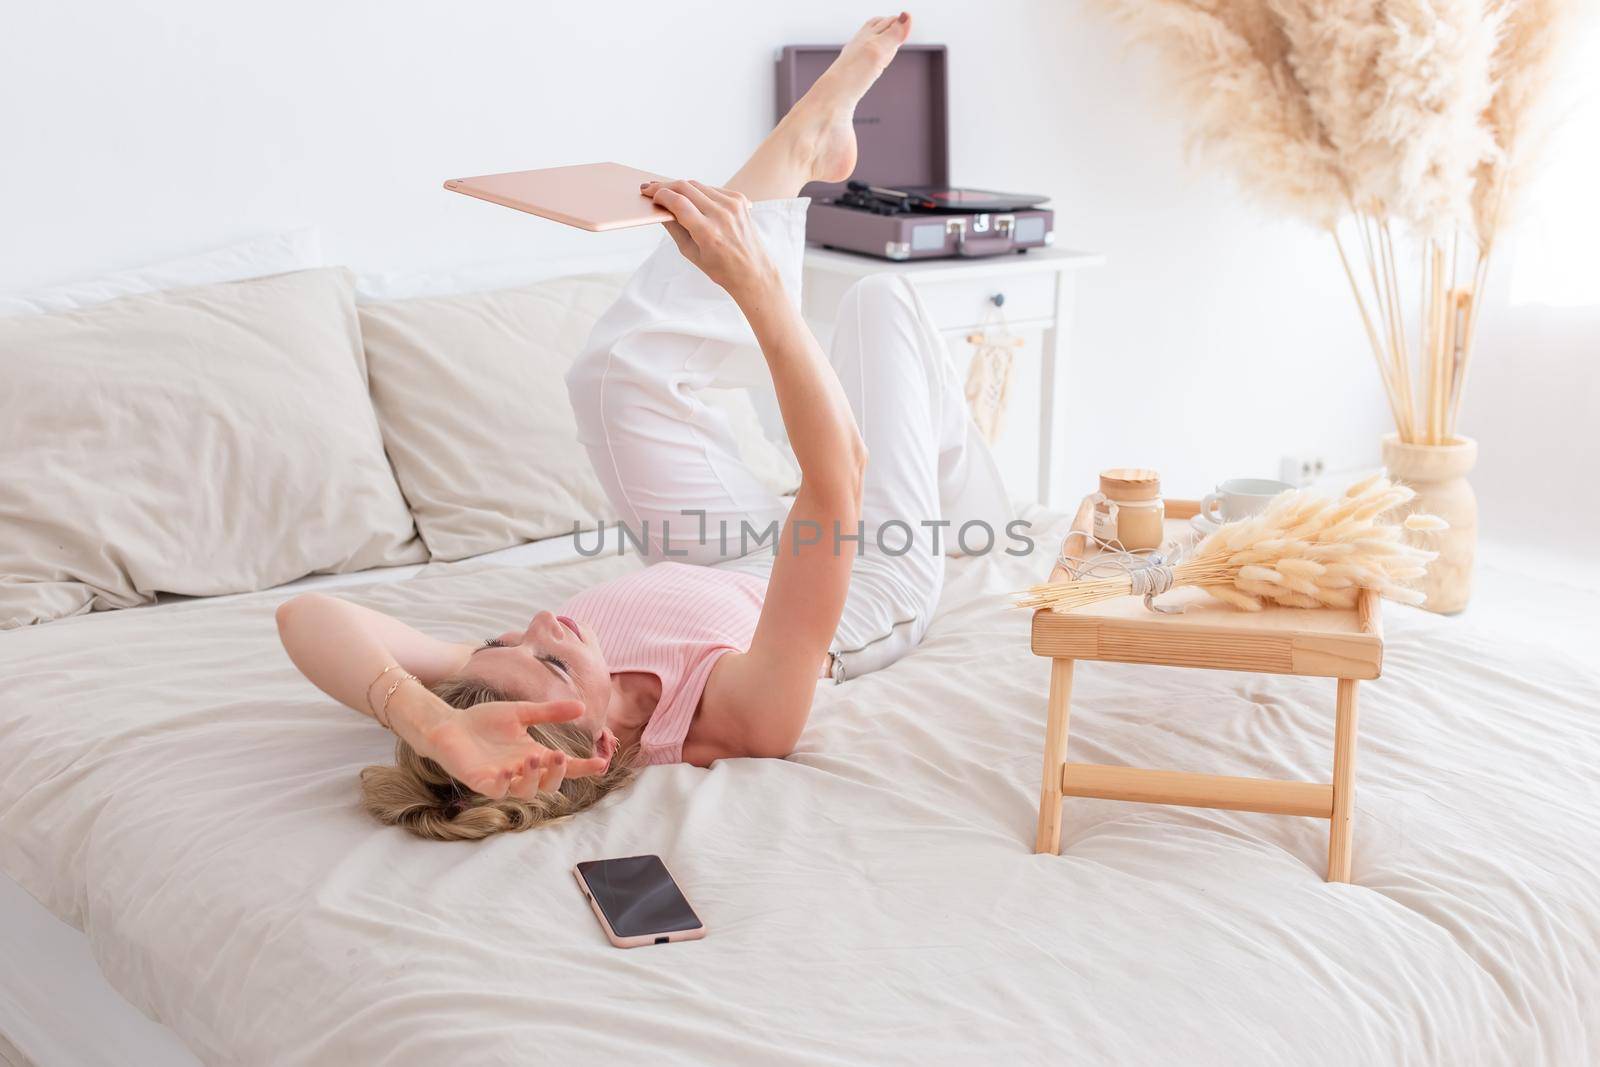 A slender beautiful woman, 30-40 years old, with blond hair, in a pink top and white pants, lies on the bed in the morning on her back, holds a digital tablet in her hands, a smartphone lies nearby